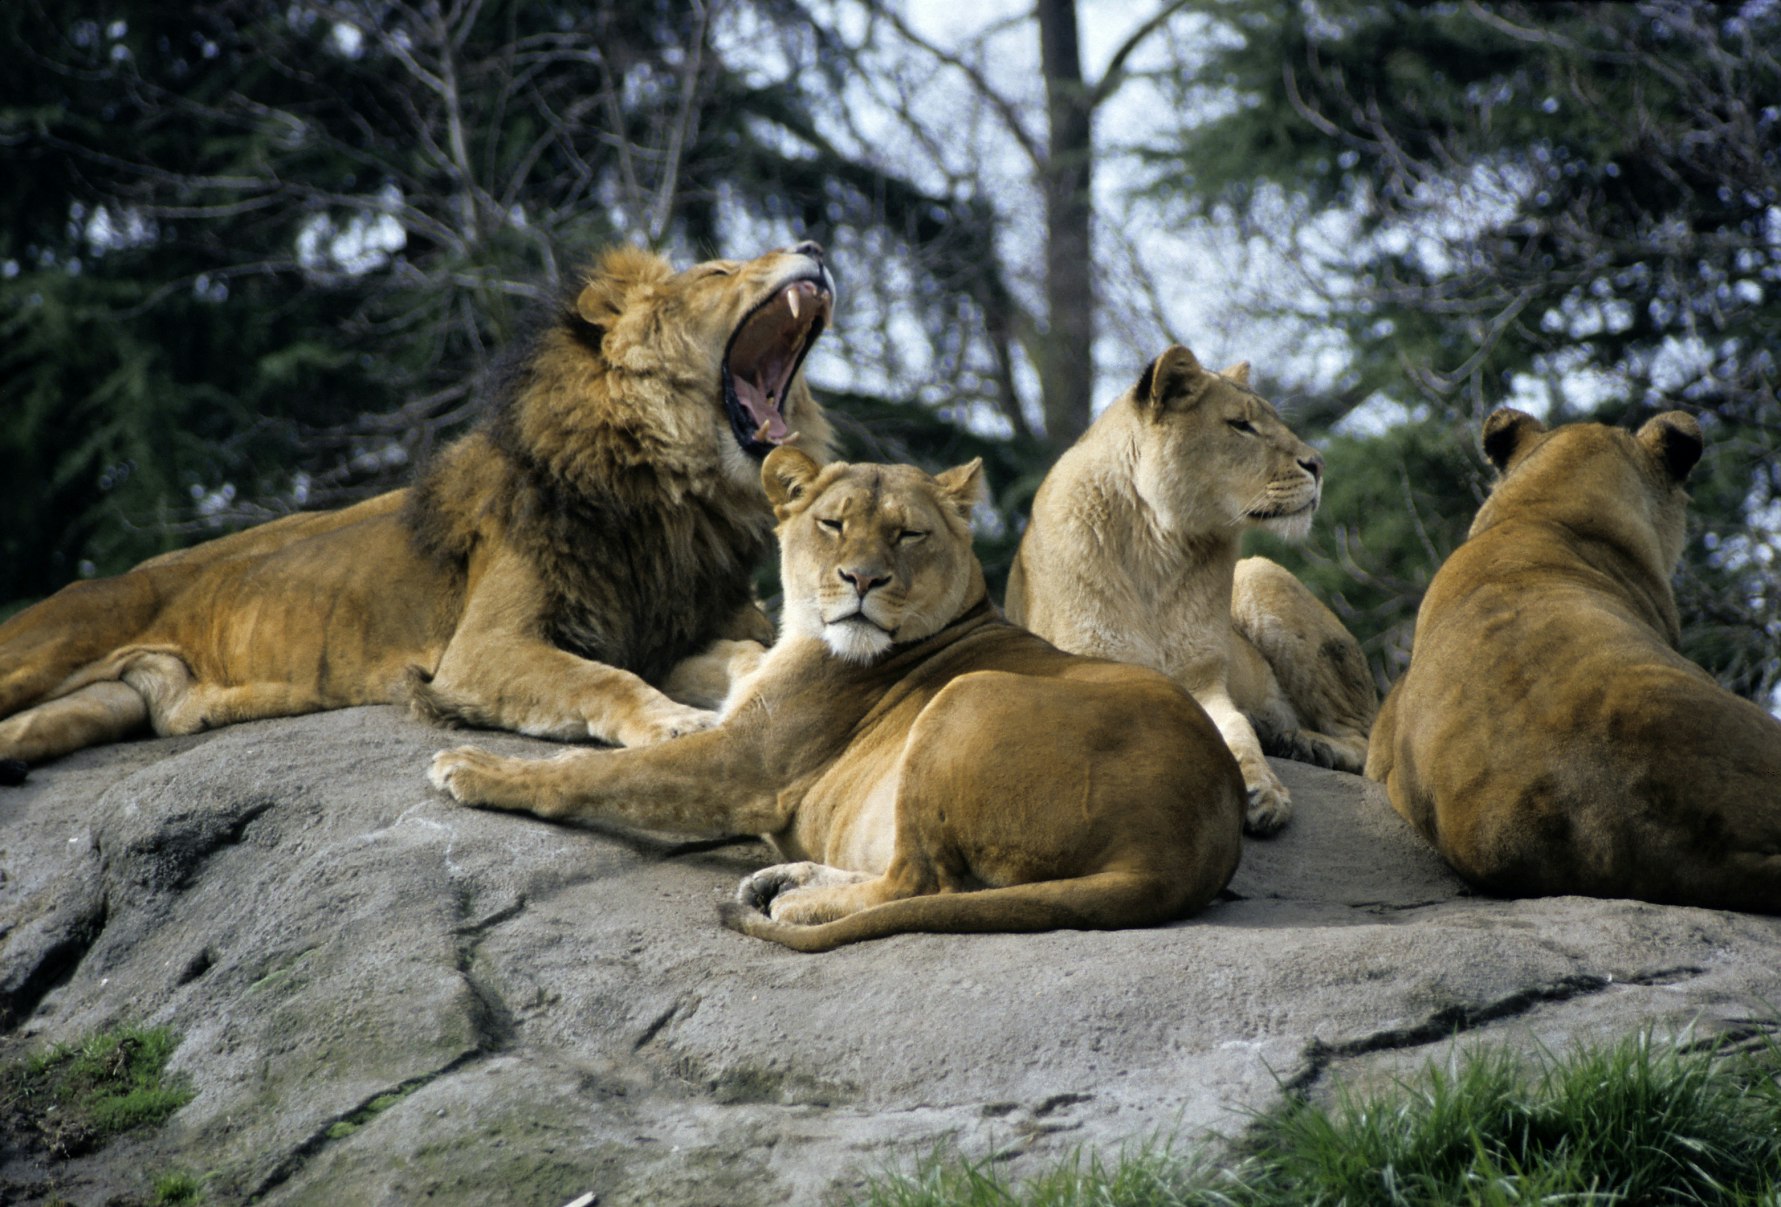 Lions at Seattle's Woodland Park Zoo; Shutterstock ID 112476; Your name (First / Last): Alexander Howard; GL account no.: 65050; Netsuite department name: Online Editorial; Full Product or Project name including edition: Western USA neighborhood POI highlights